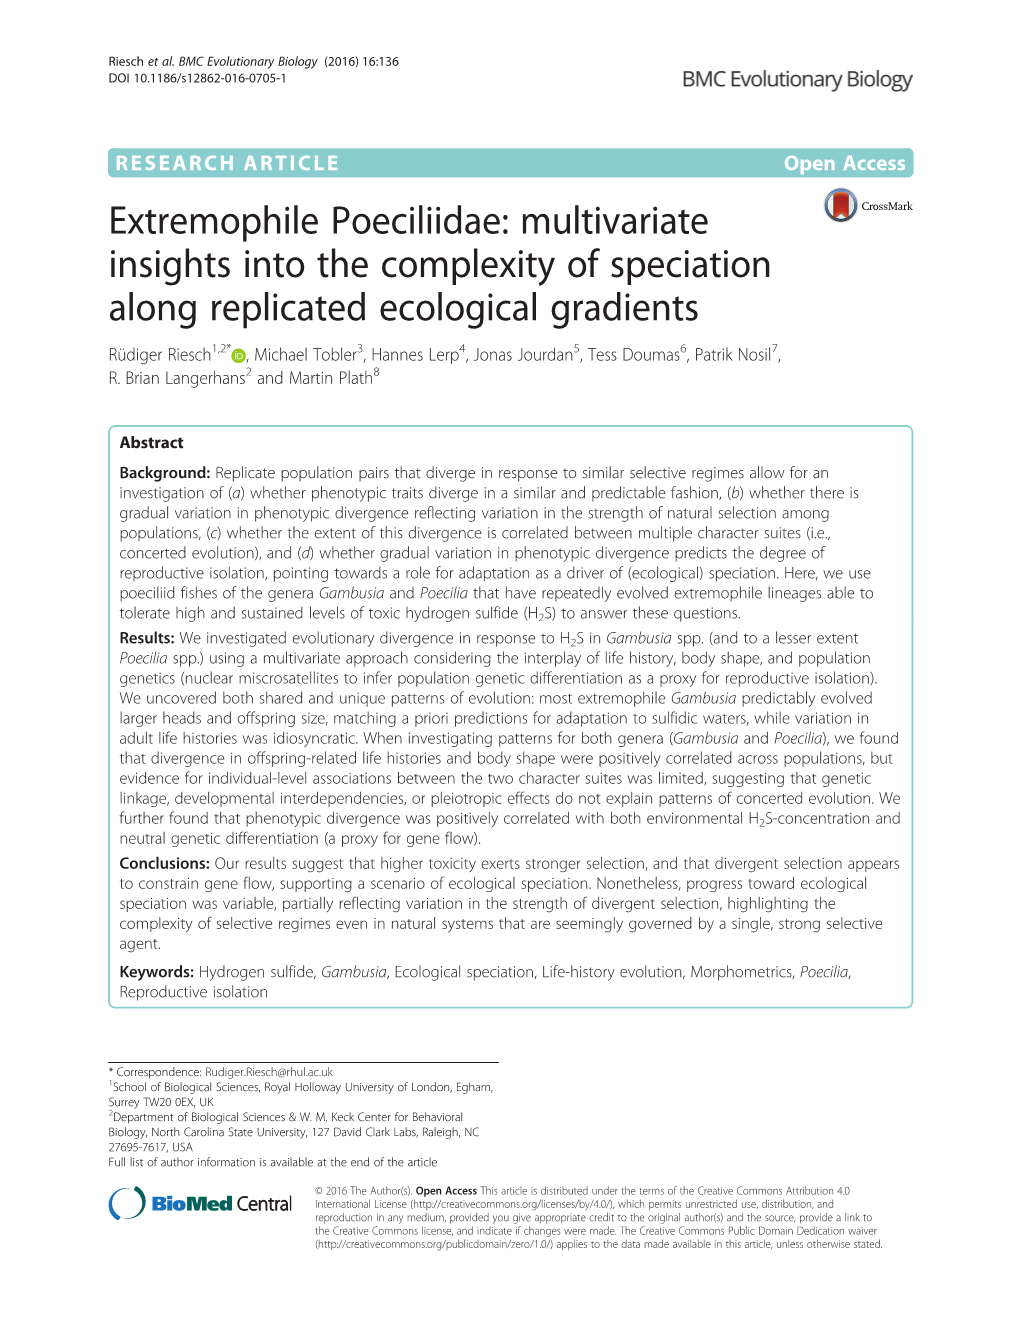 Extremophile Poeciliidae: Multivariate Insights Into the Complexity of Speciation Along Replicated Ecological Gradients